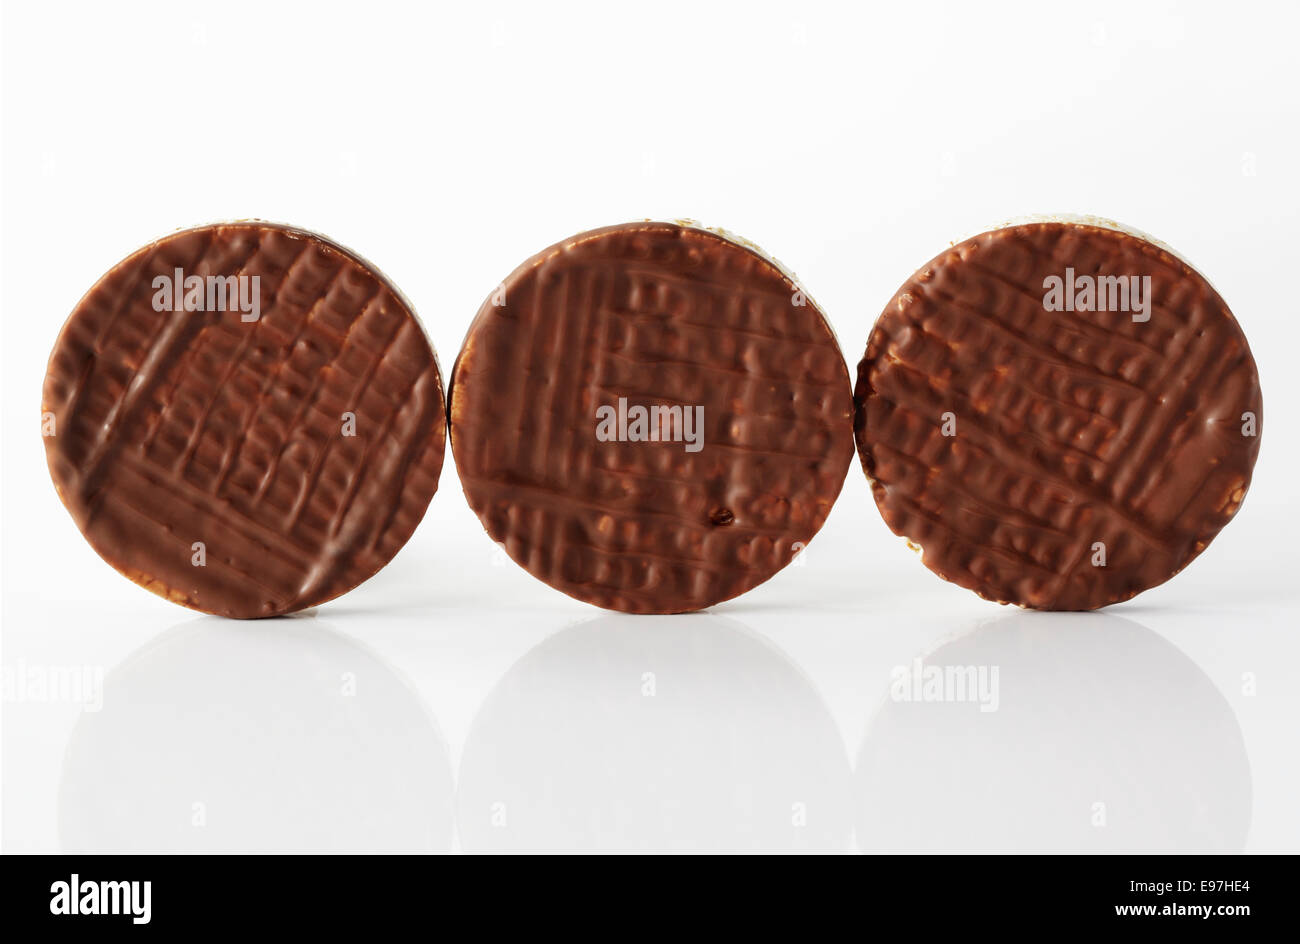 Chocolate covered Rice cakes in a row Stock Photo